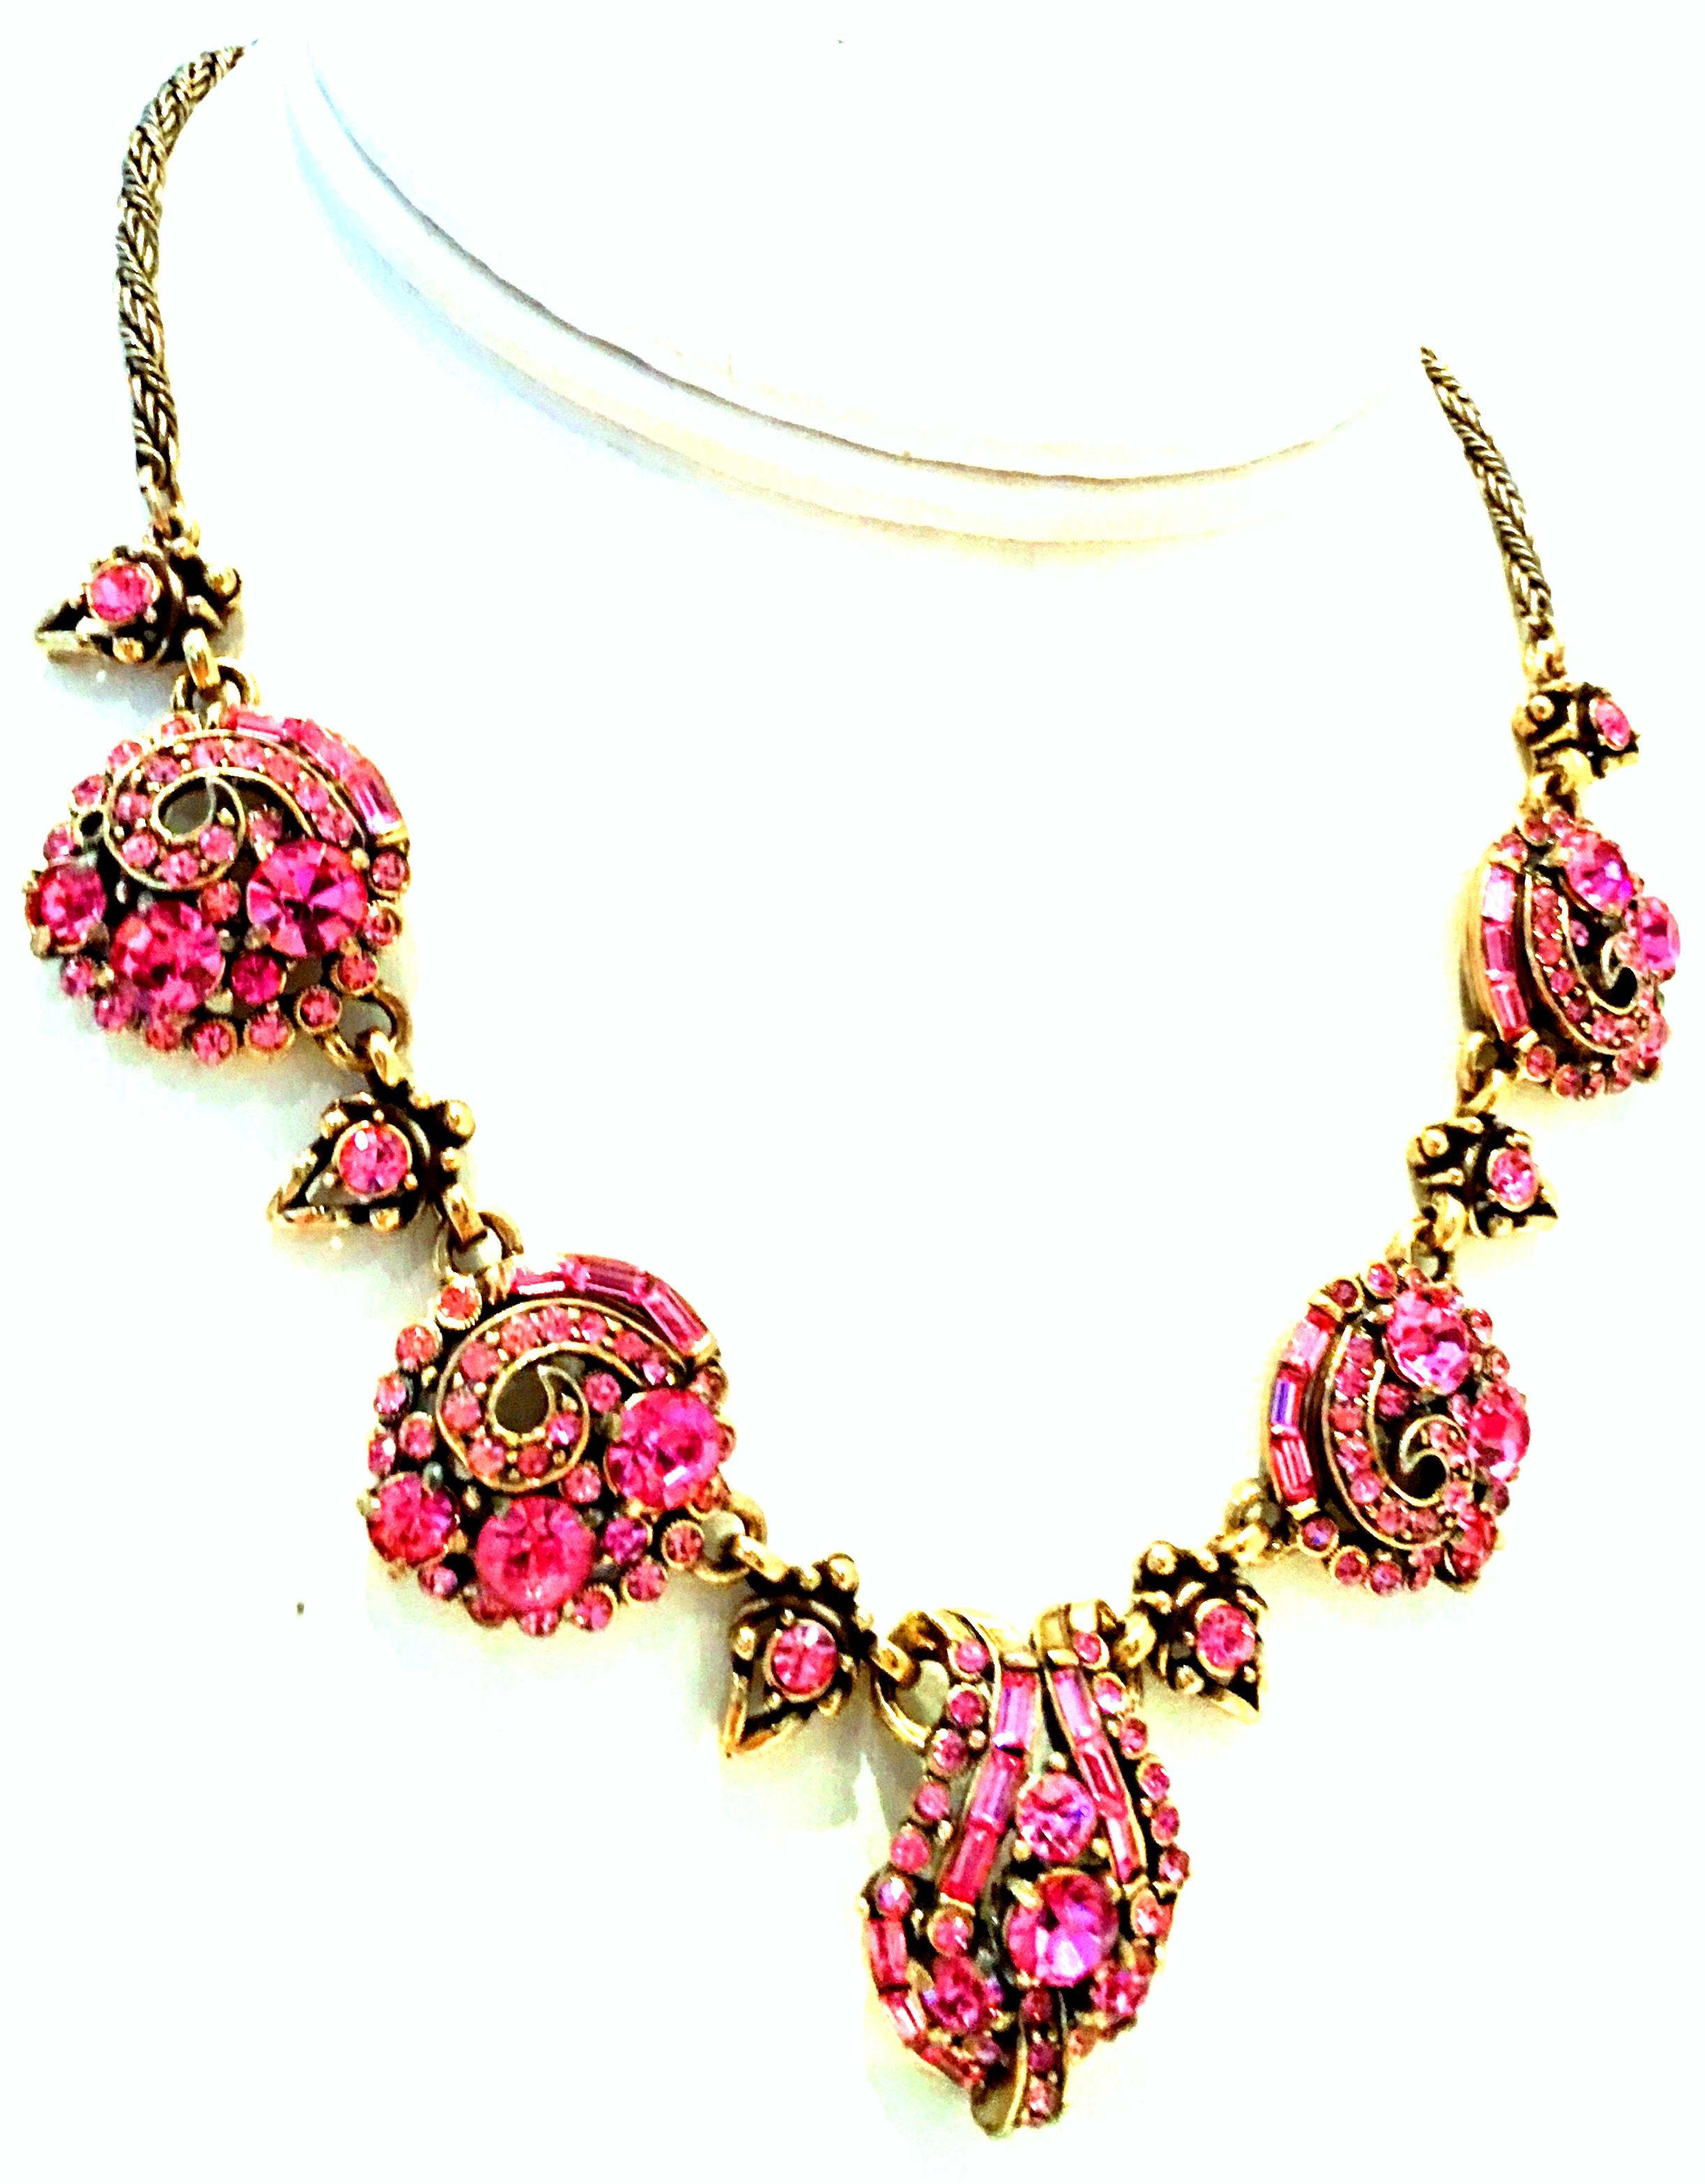 1955 Art Deco Style Gold & Sapphire Pink Austrian Crystal Link Choker Necklace By, Hollycraft Corporation. This magnificent and finely crafted collectors 